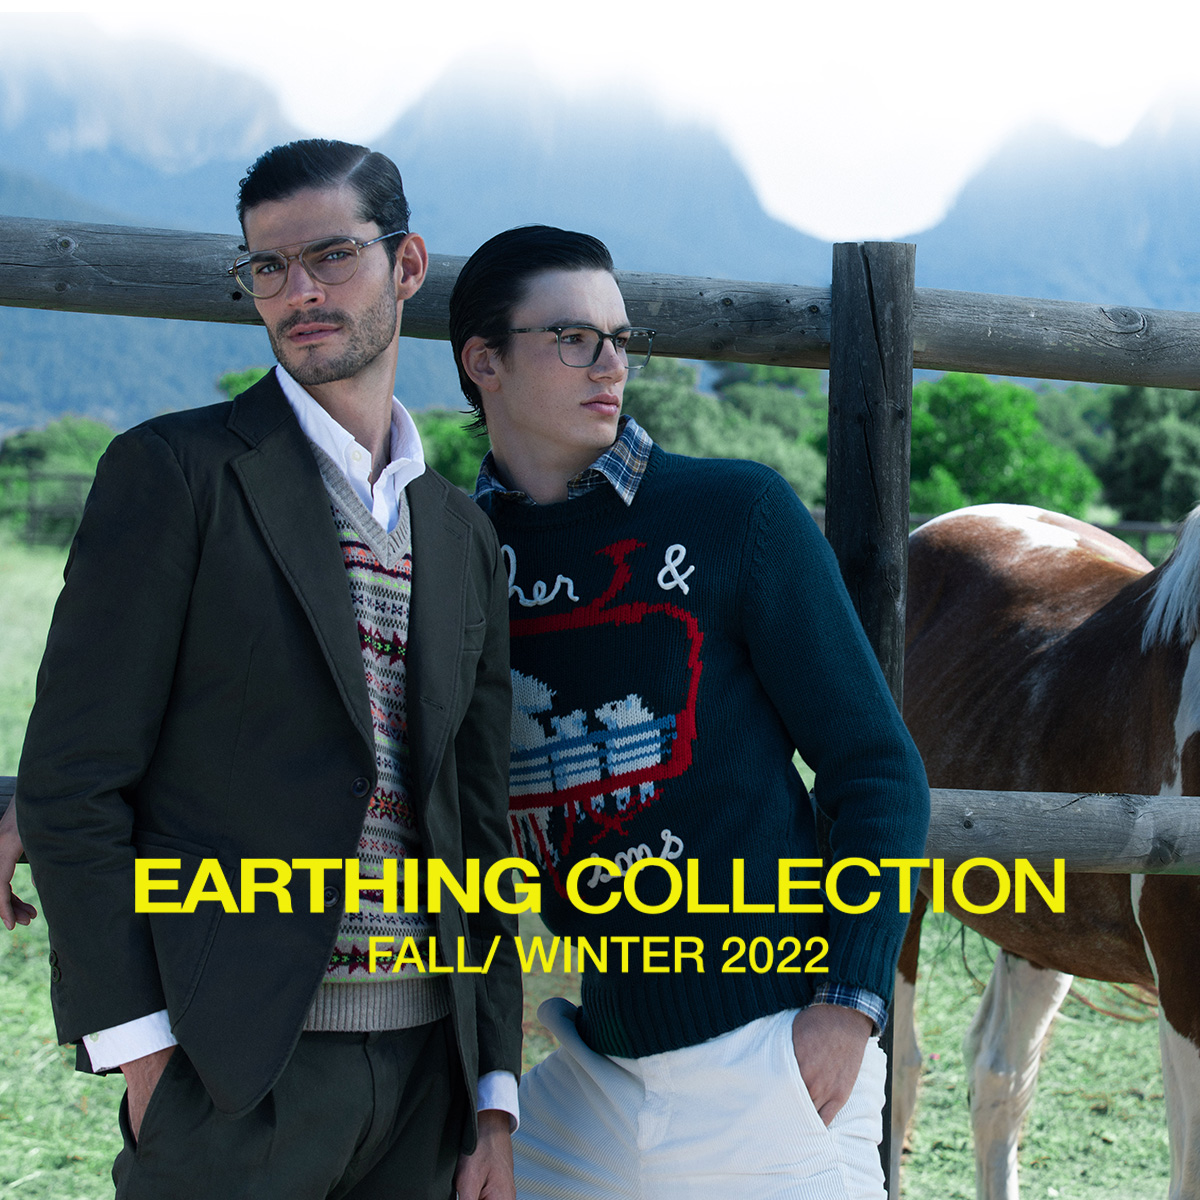 New Mó EARTHING COLLECTION